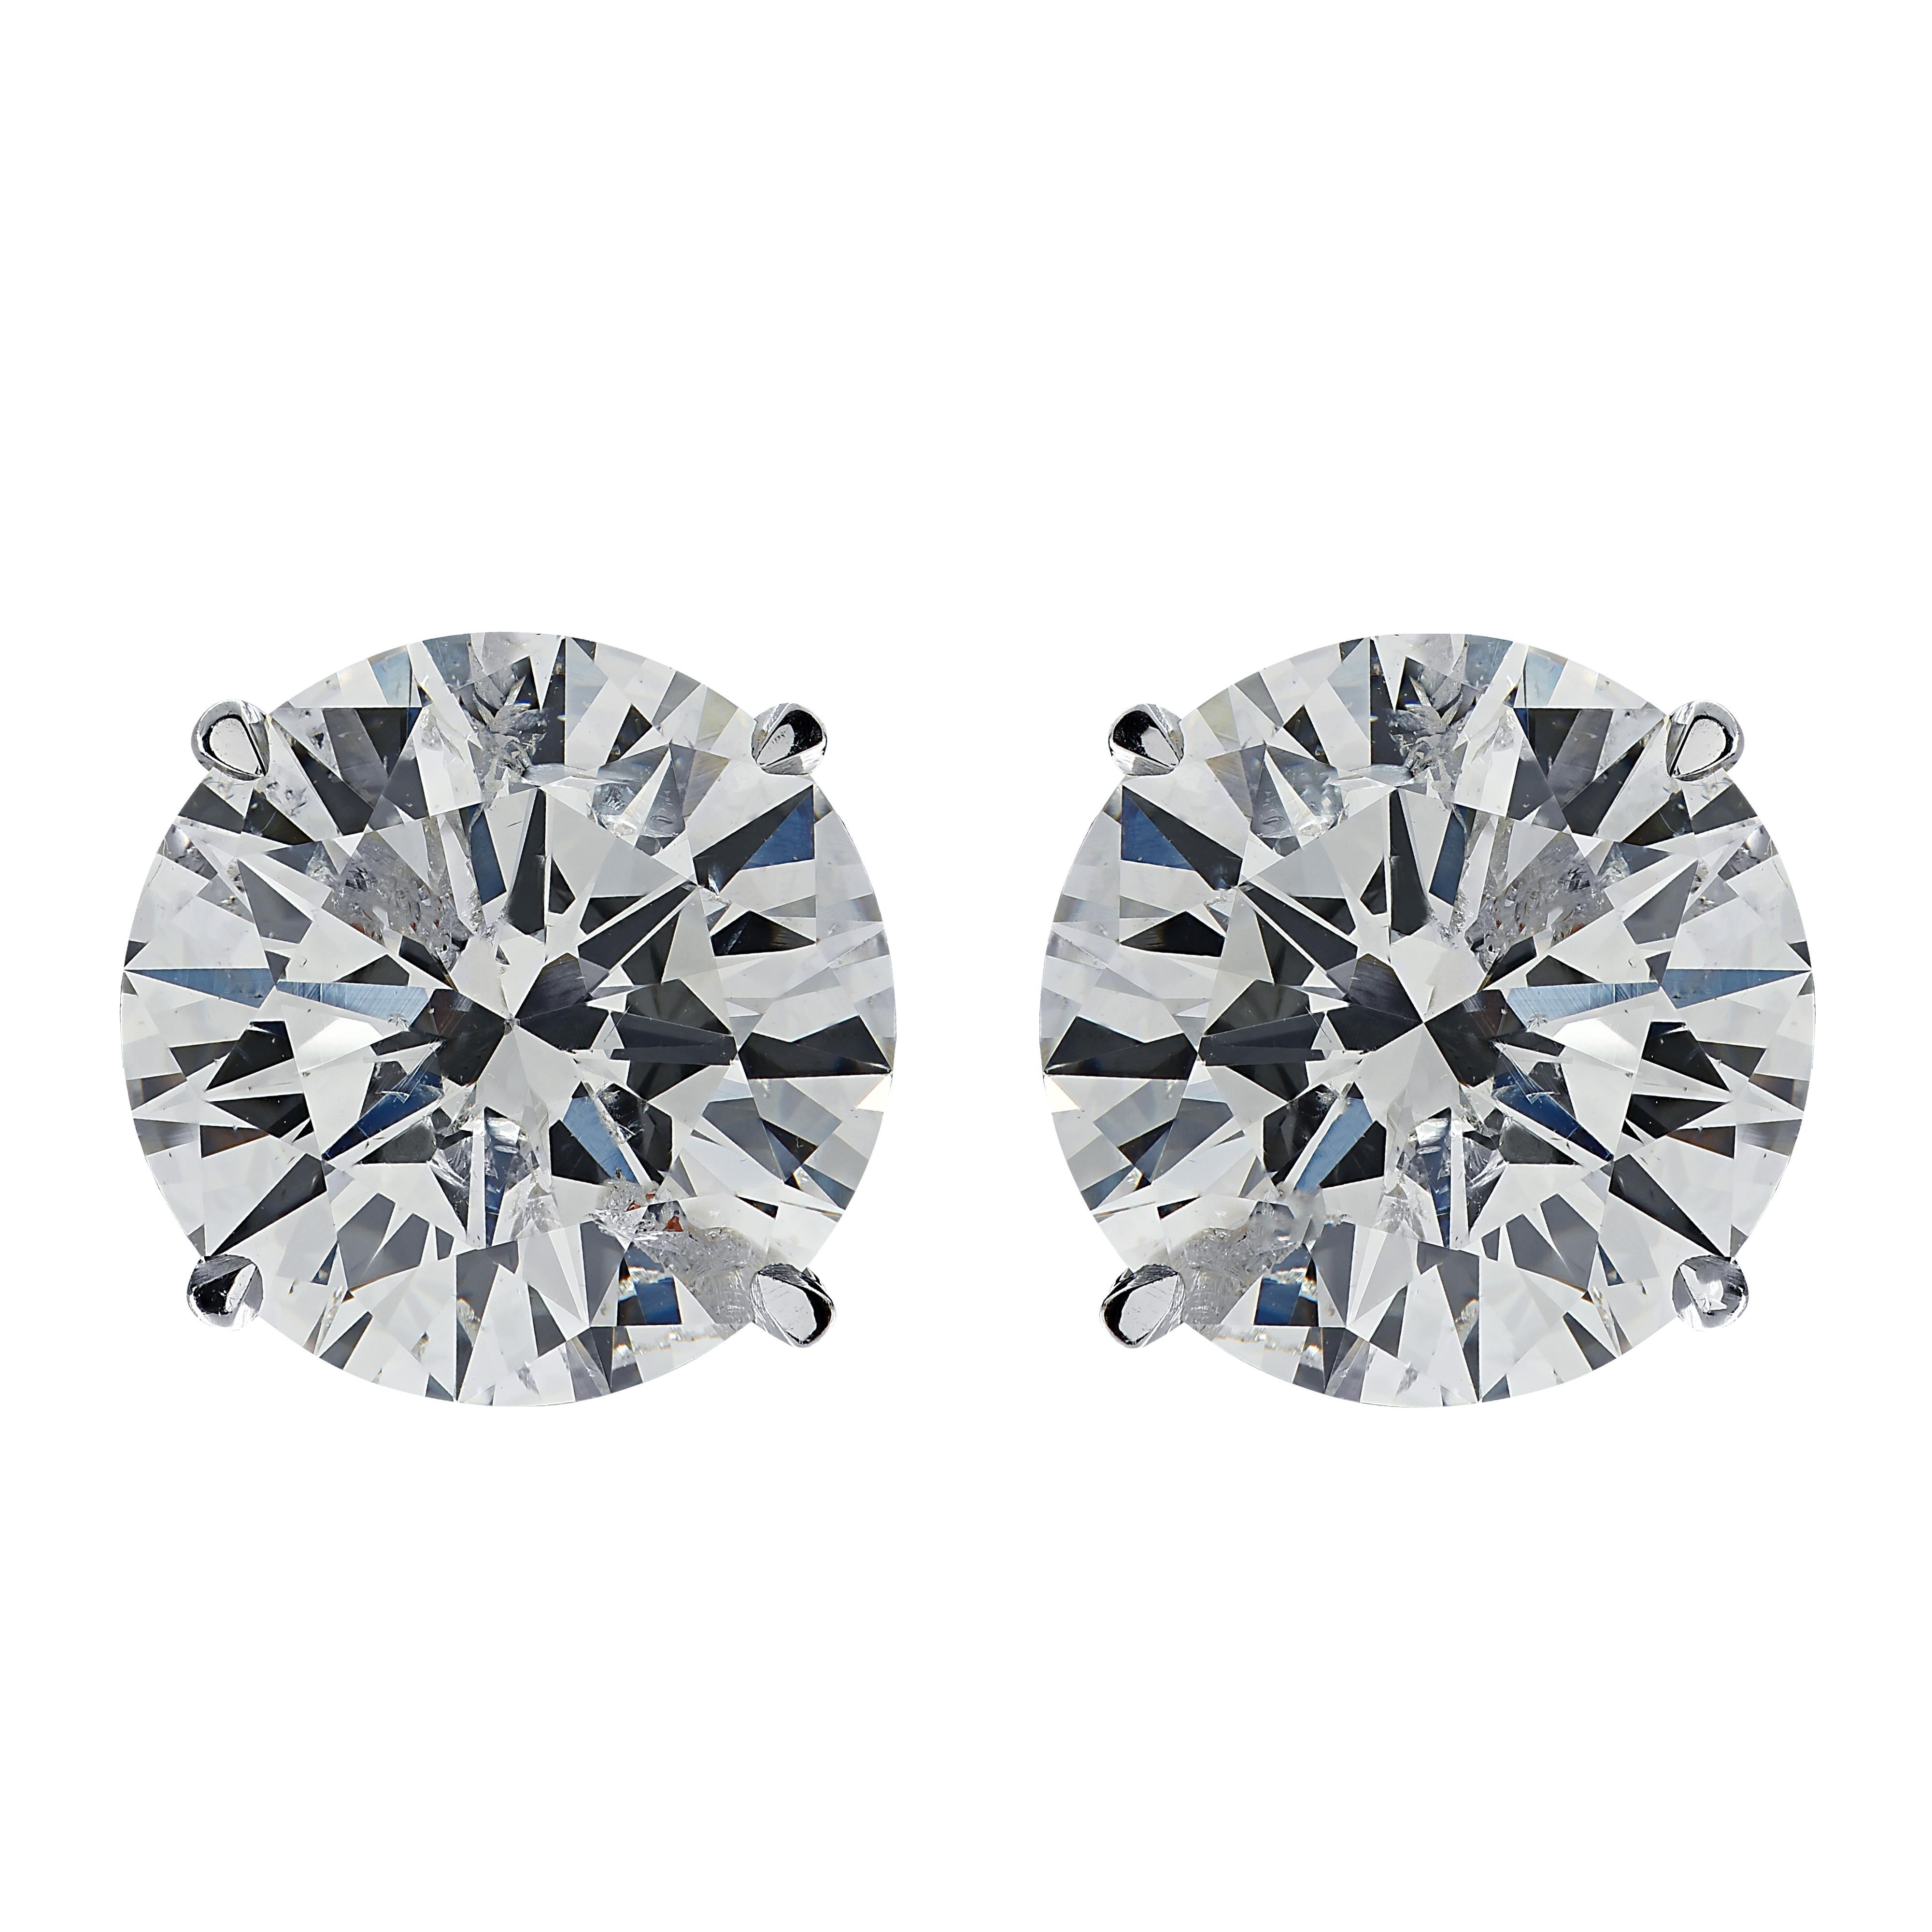 Stunning Vivid Diamonds solitaire stud earrings crafted by hand in platinum, showcasing 2 spectacular round brilliant cut diamonds weighing 4.18 carats total, I-J color, SI clarity. These diamonds were carefully selected and perfectly matched to